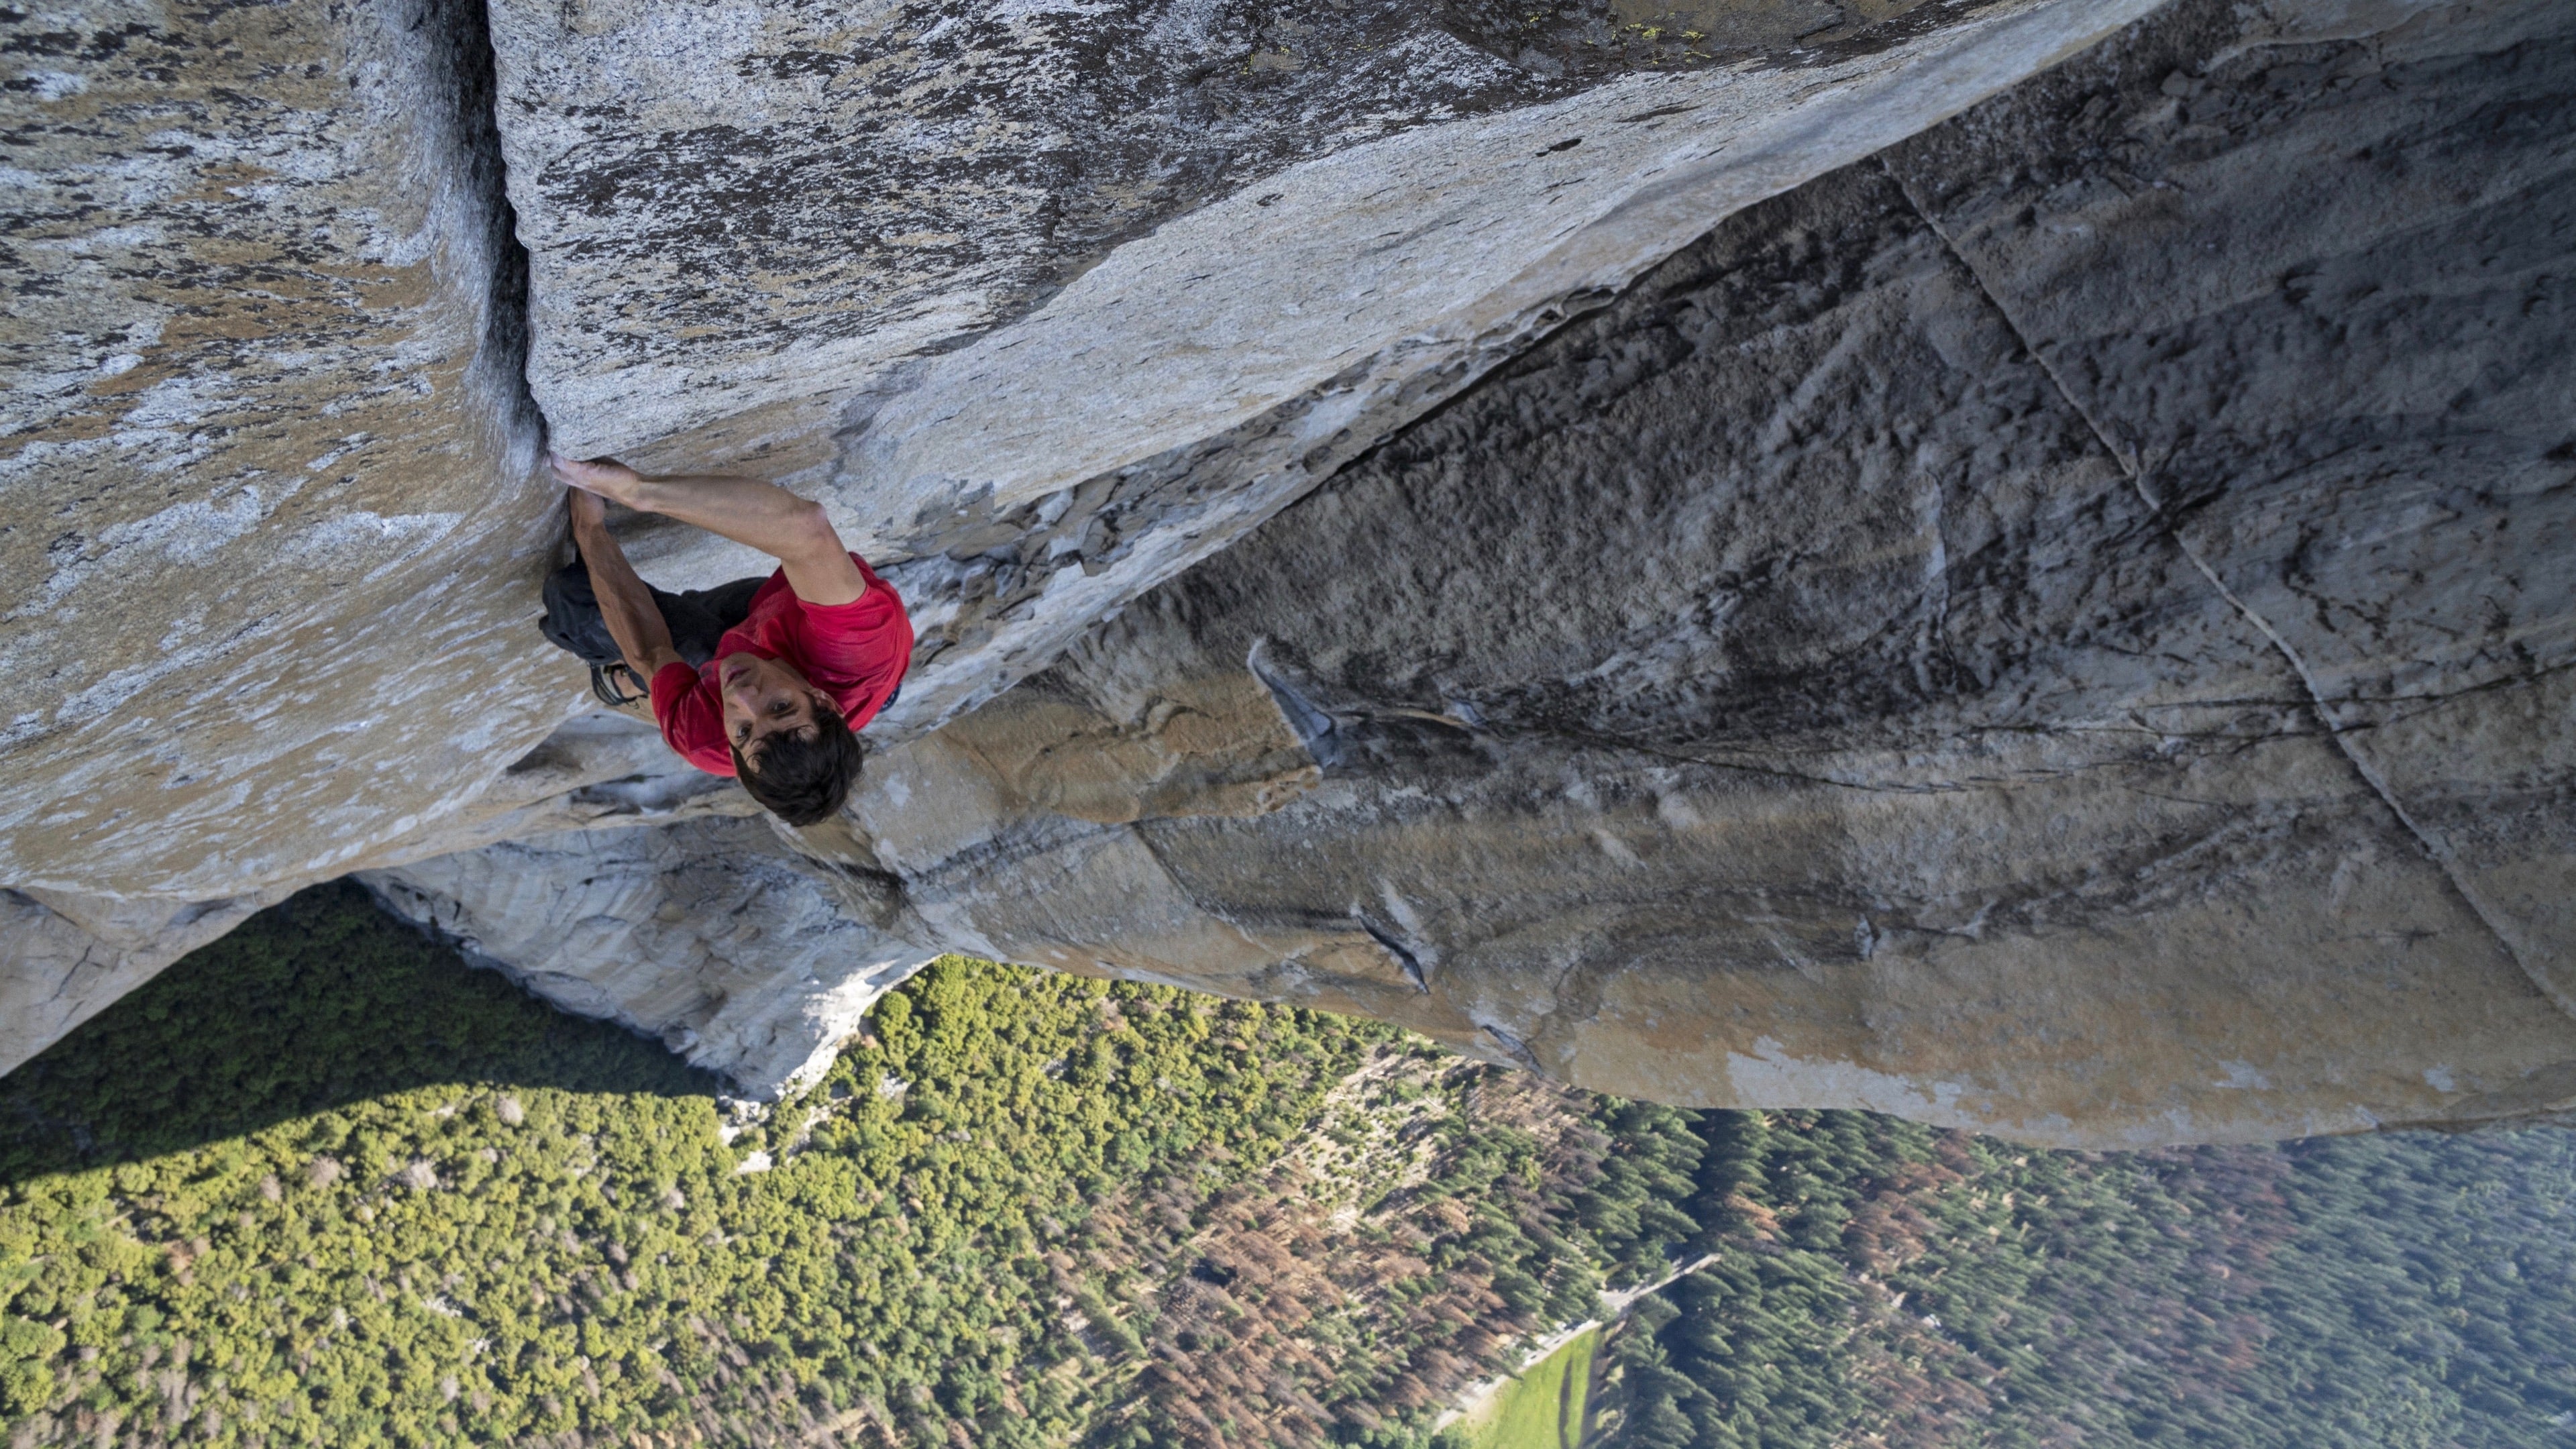 Free Solo review